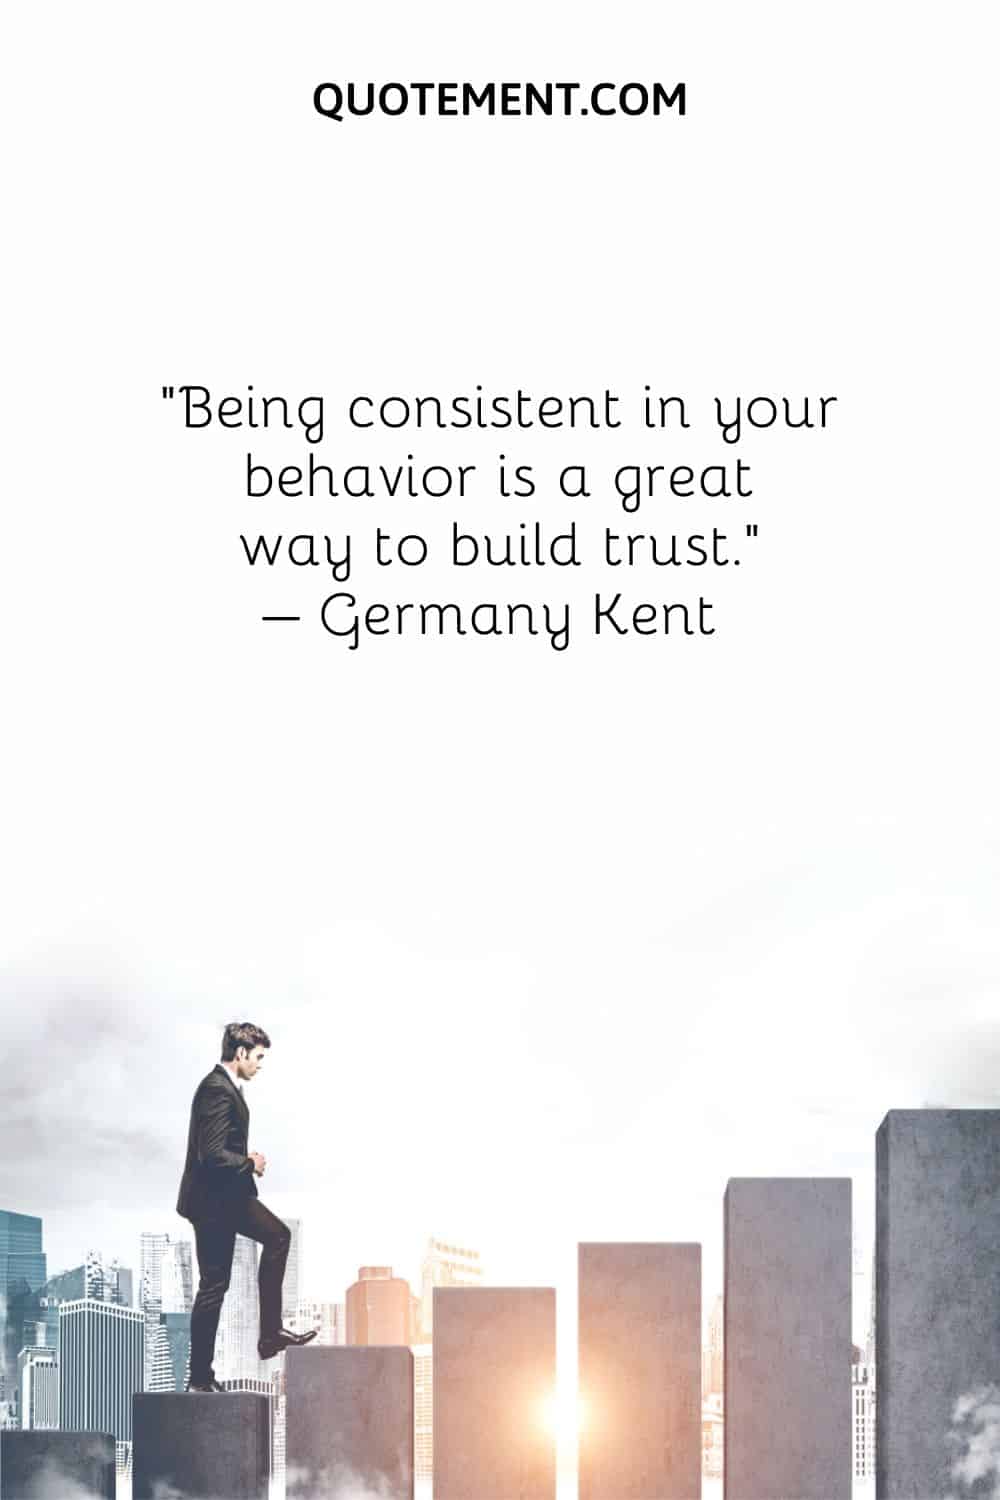 Being consistent in your behavior is a great way to build trust